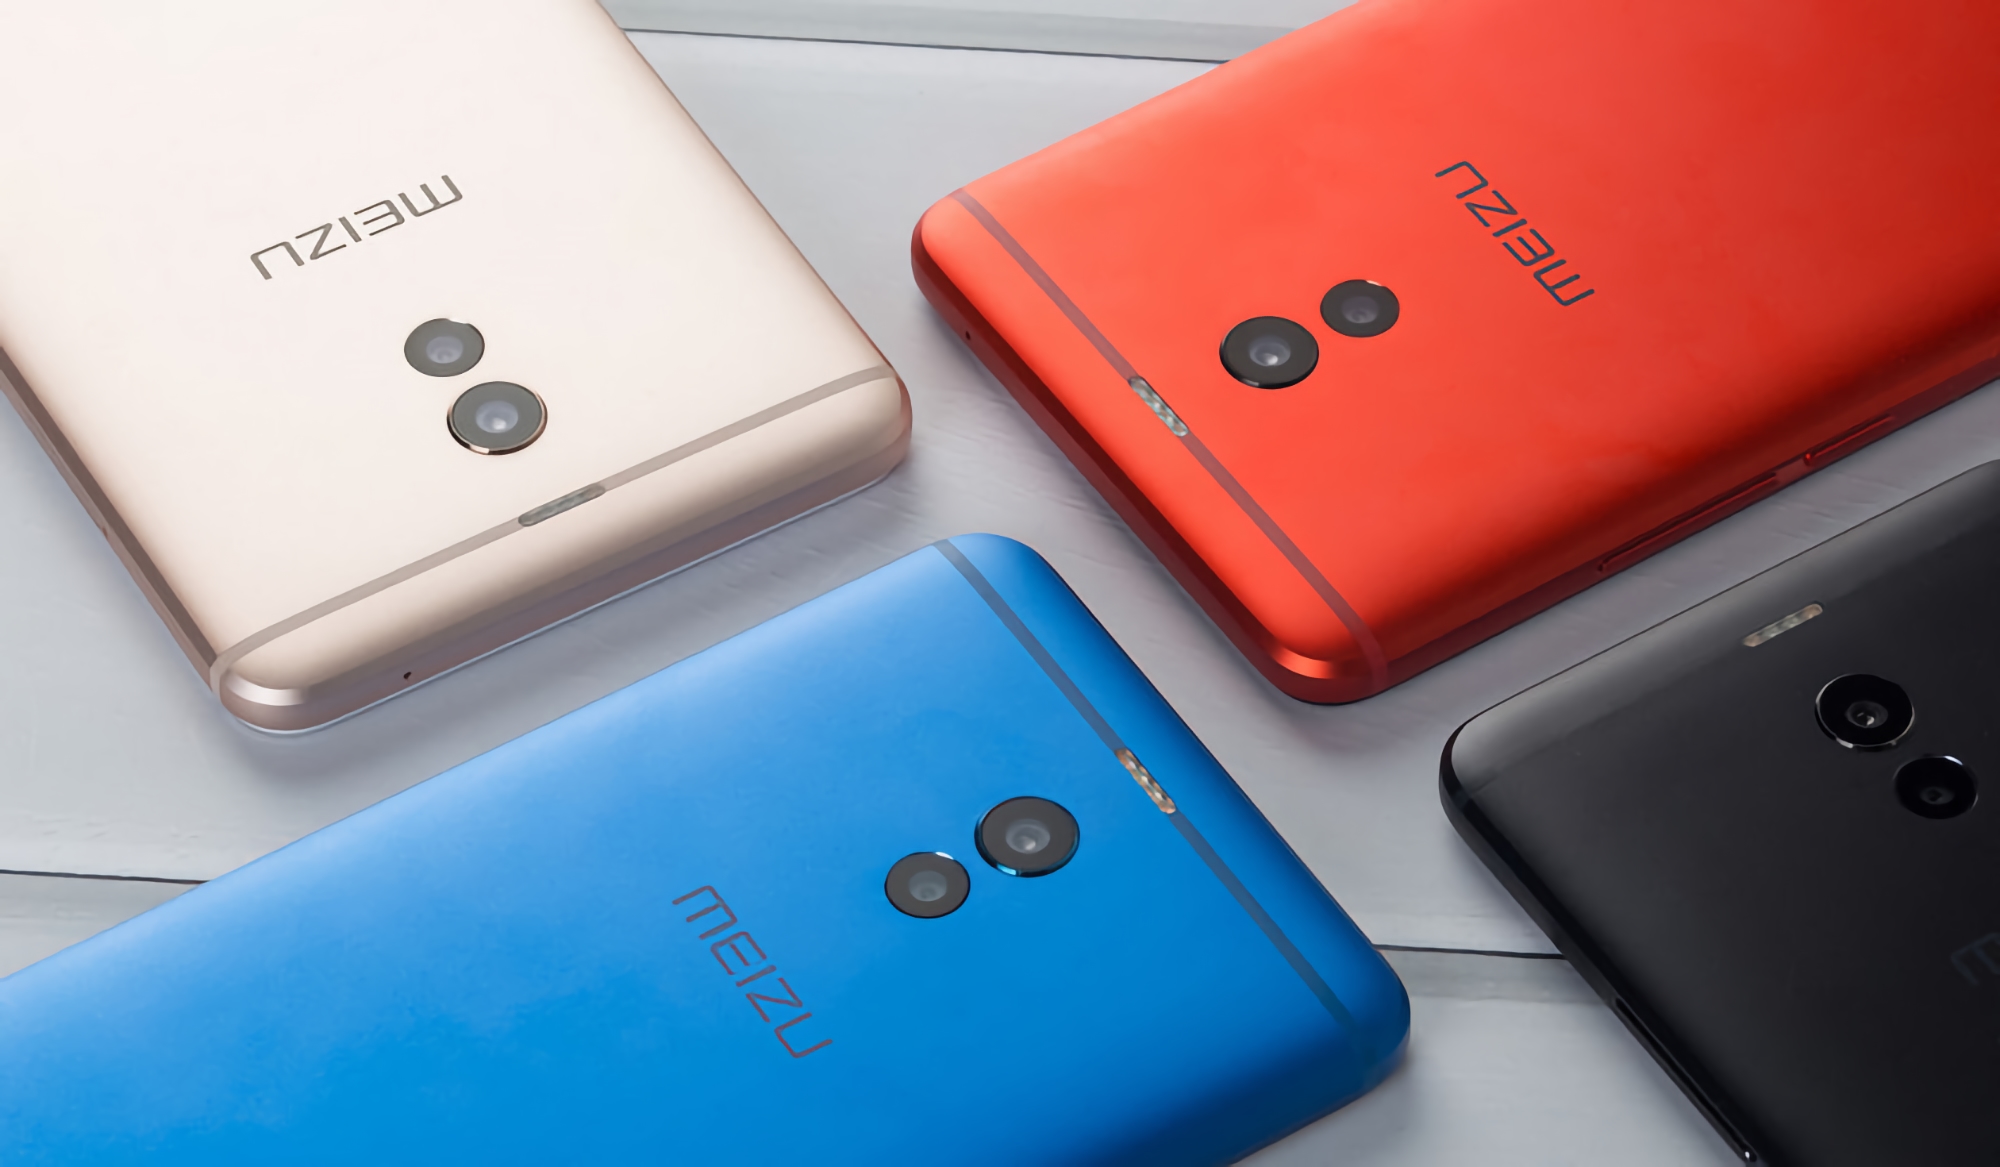 It's official: Meizu will launch budget smartphones under the Blue Charm brand again